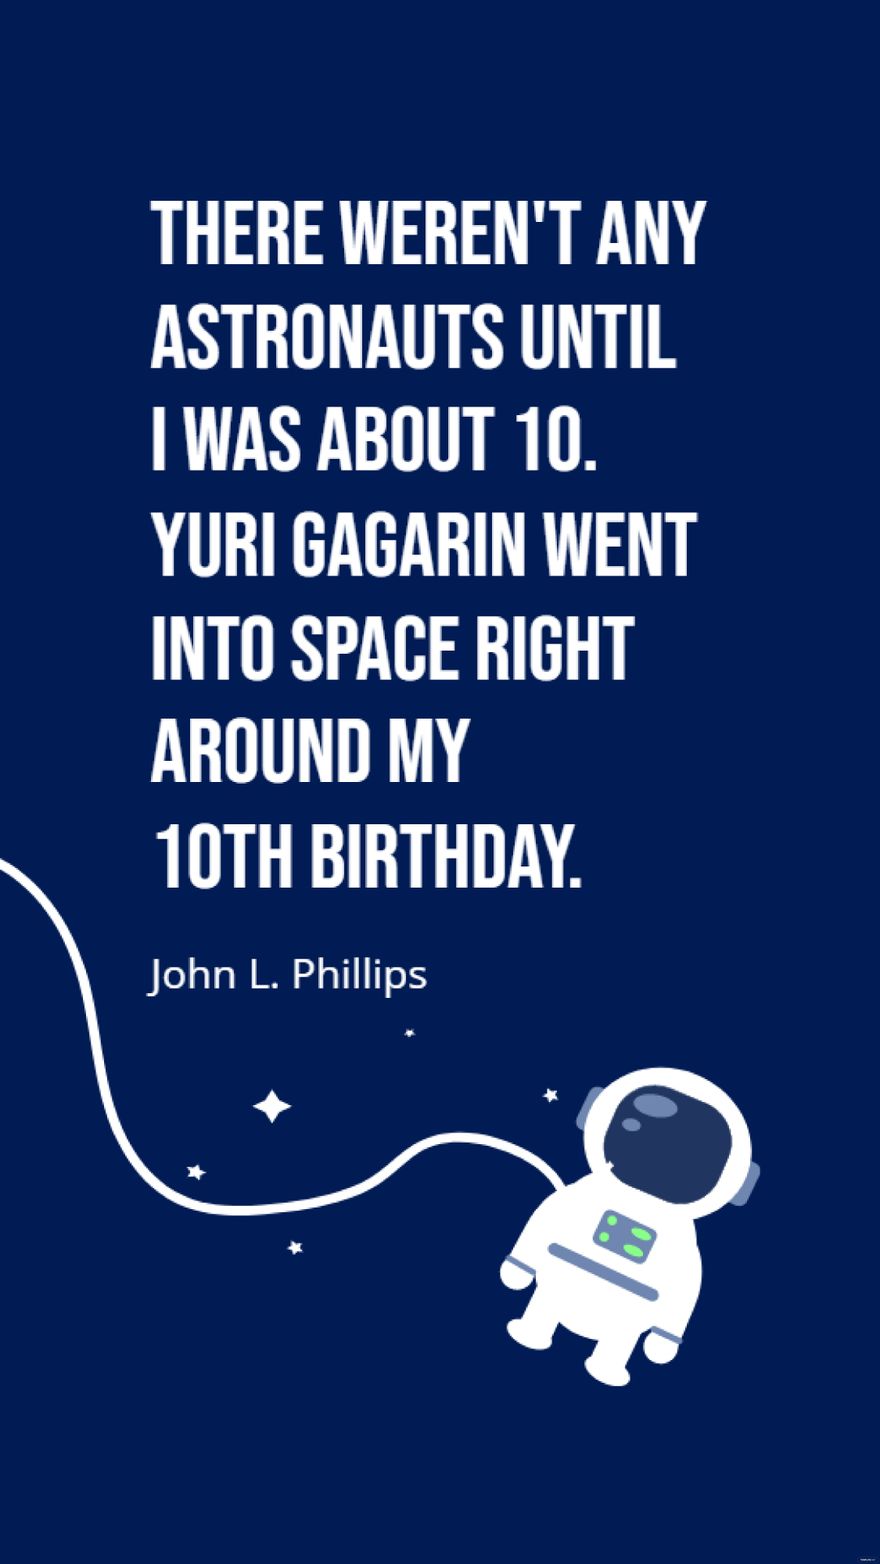 Free John L. Phillips - There weren't any astronauts until I was about 10. Yuri Gagarin went into space right around my 10th birthday.